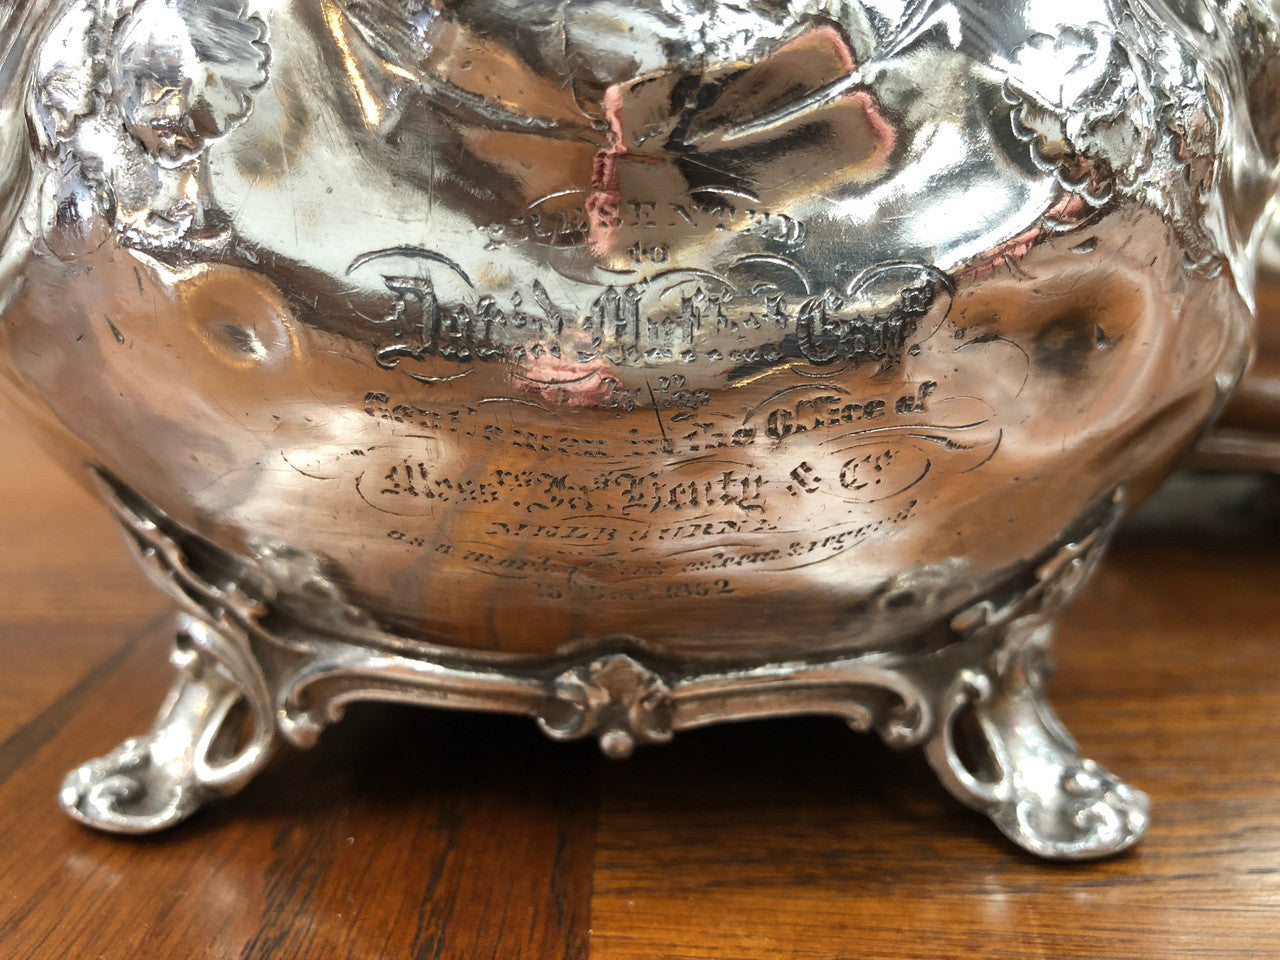 Antique Silver plate Britannia metal Victorian 4 piece tea / coffee service with lovely detail . Inscription and date of 1852.